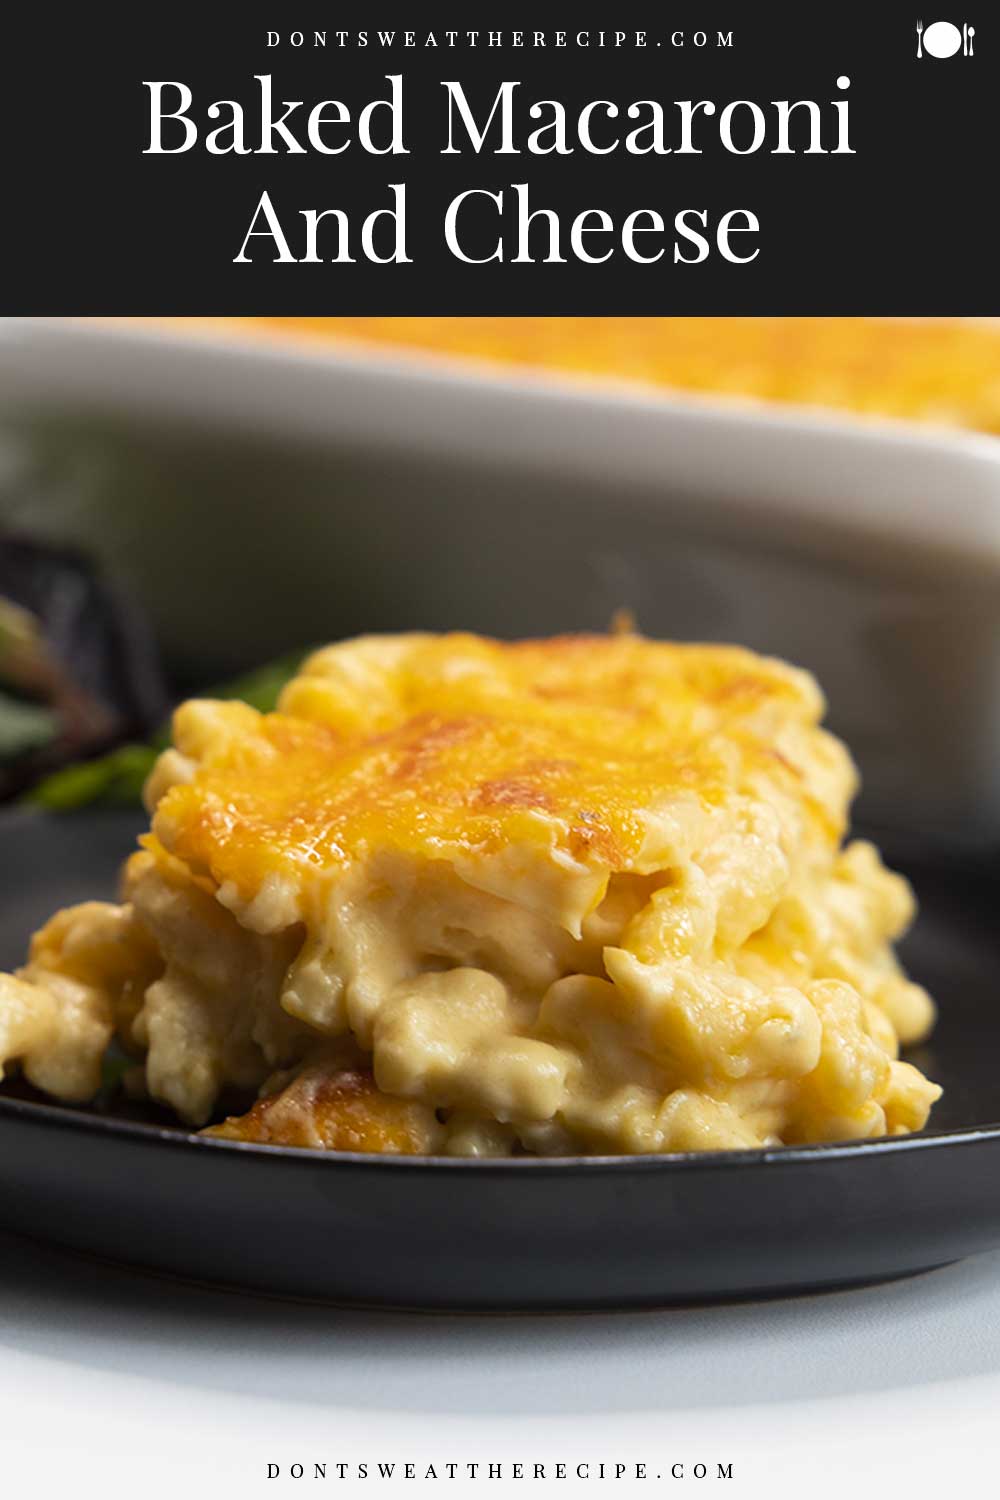 Baked Macaroni And Cheese - Don't Sweat The Recipe